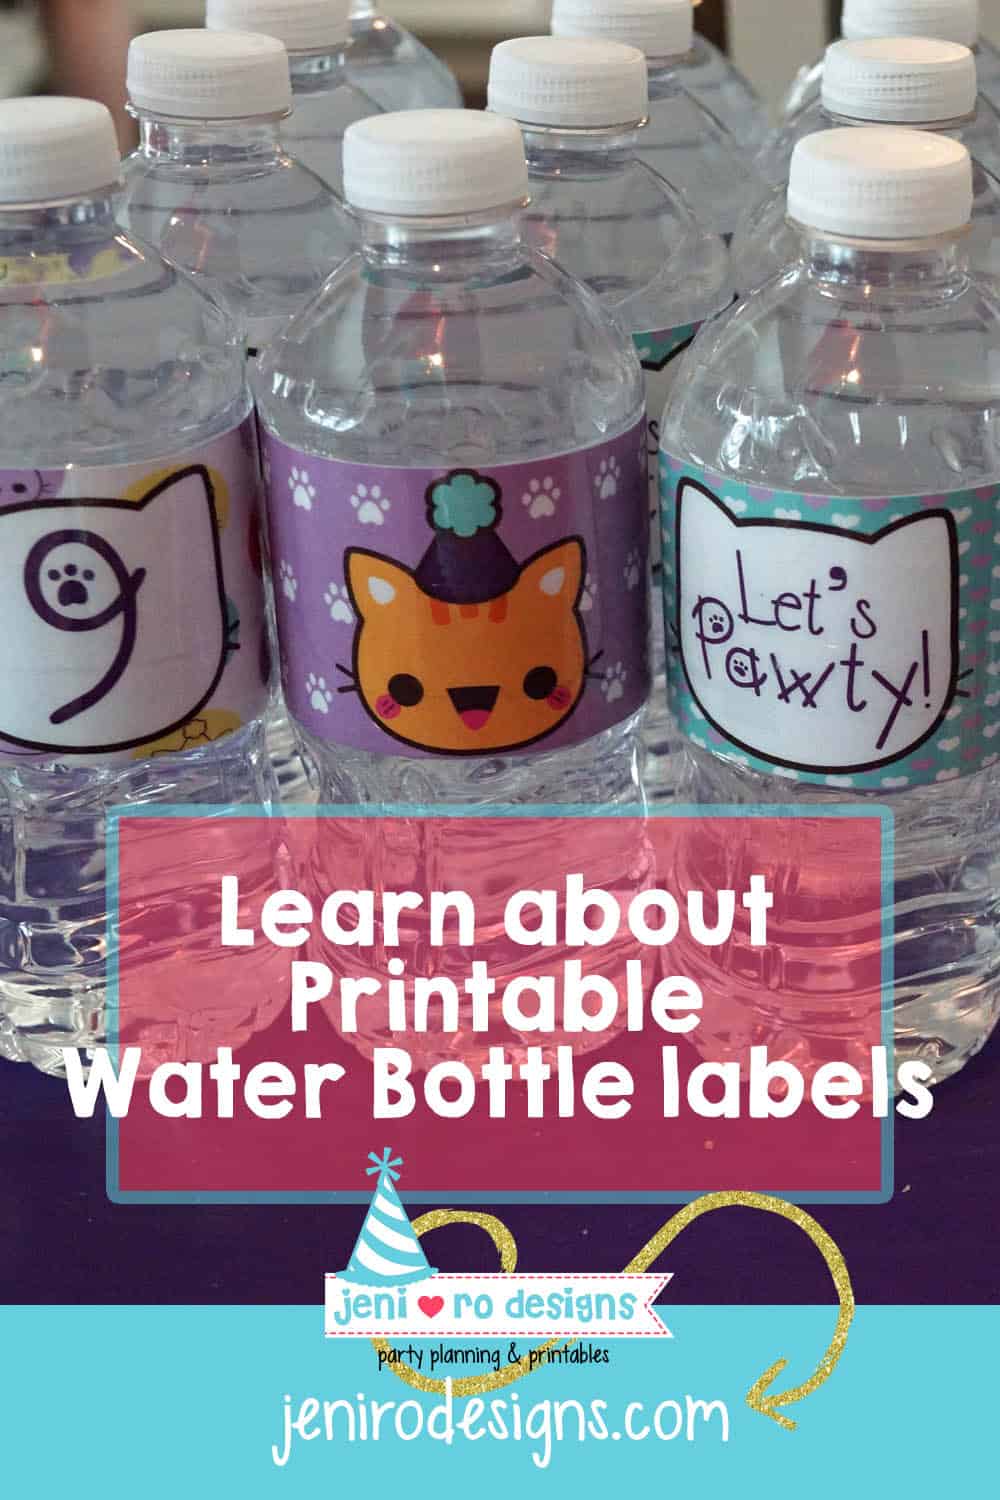 Printable water bottle labels are easy and fun to use at your next party!